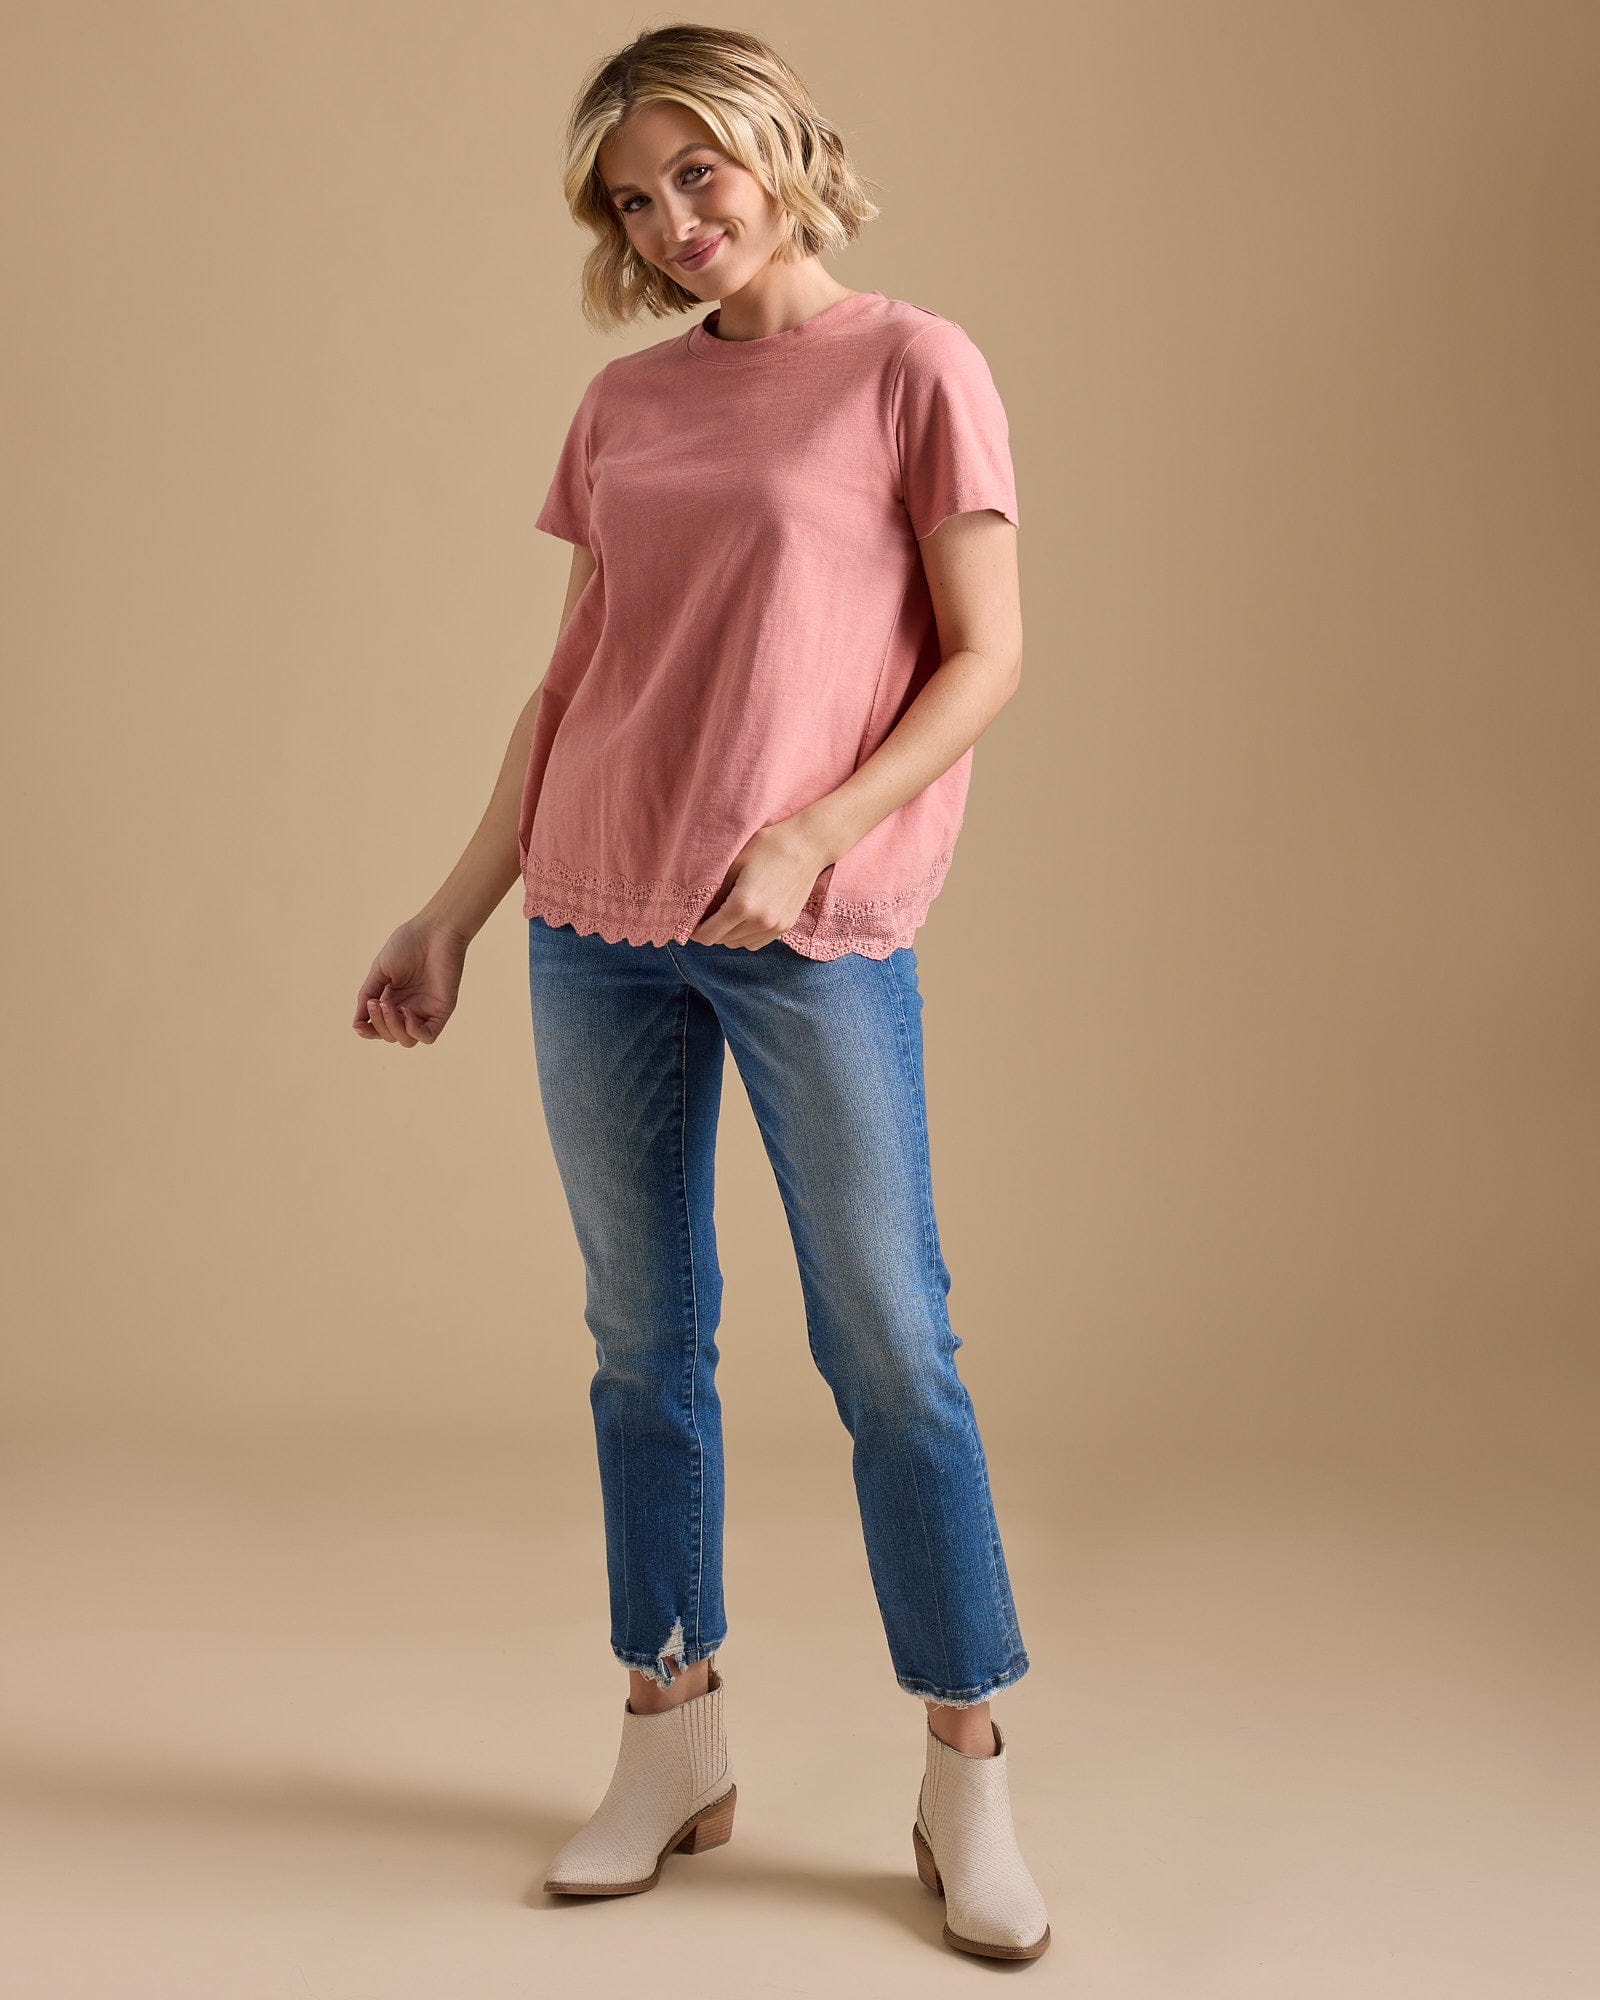 Woman in a pink short sleeve top with lace detail at hem